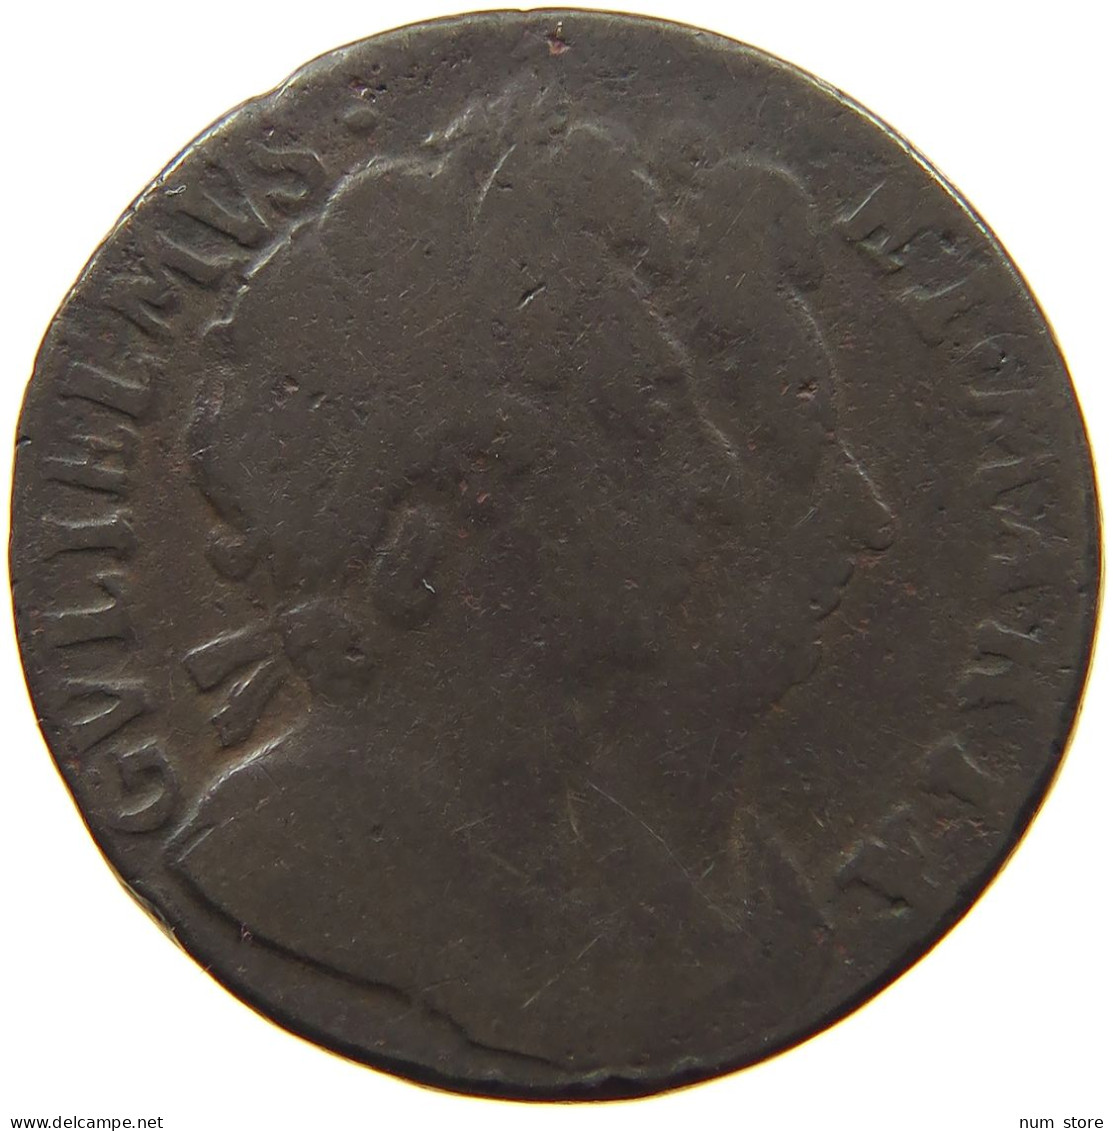 GREAT BRITAIN FARTHING 1694 William And Mary (1689-1694) #t149 0245 - A. 1 Farthing